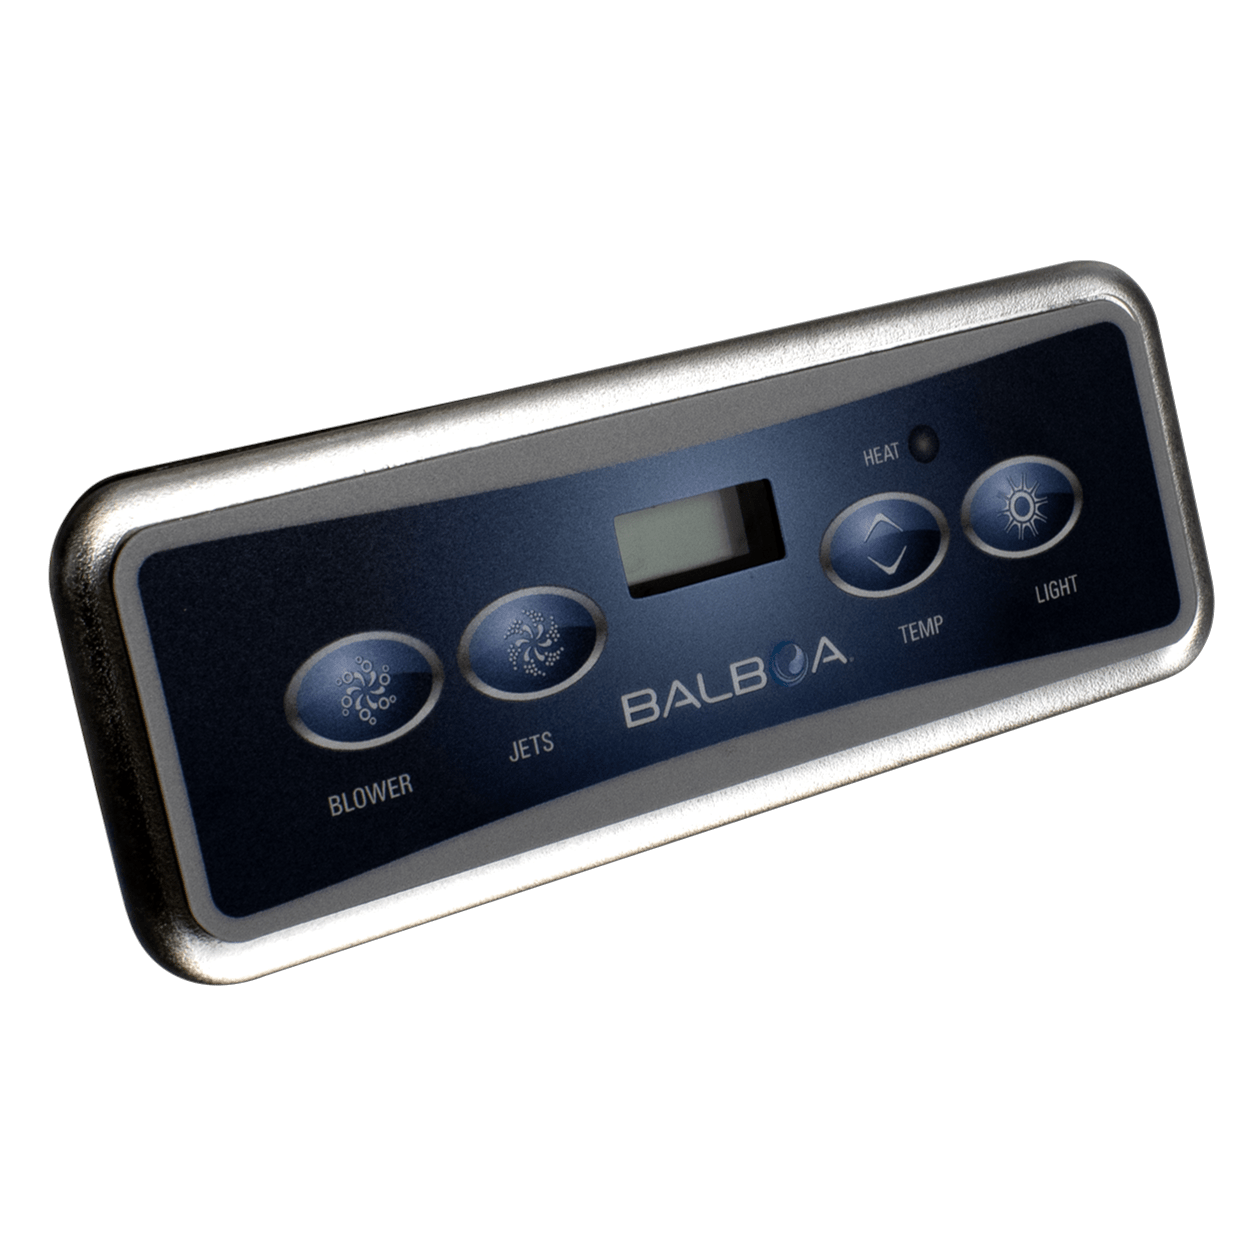 VL401 Duplexl 4-Button Panel with Standard Balboa Overlay PN 52424-01 and 10669.html.html